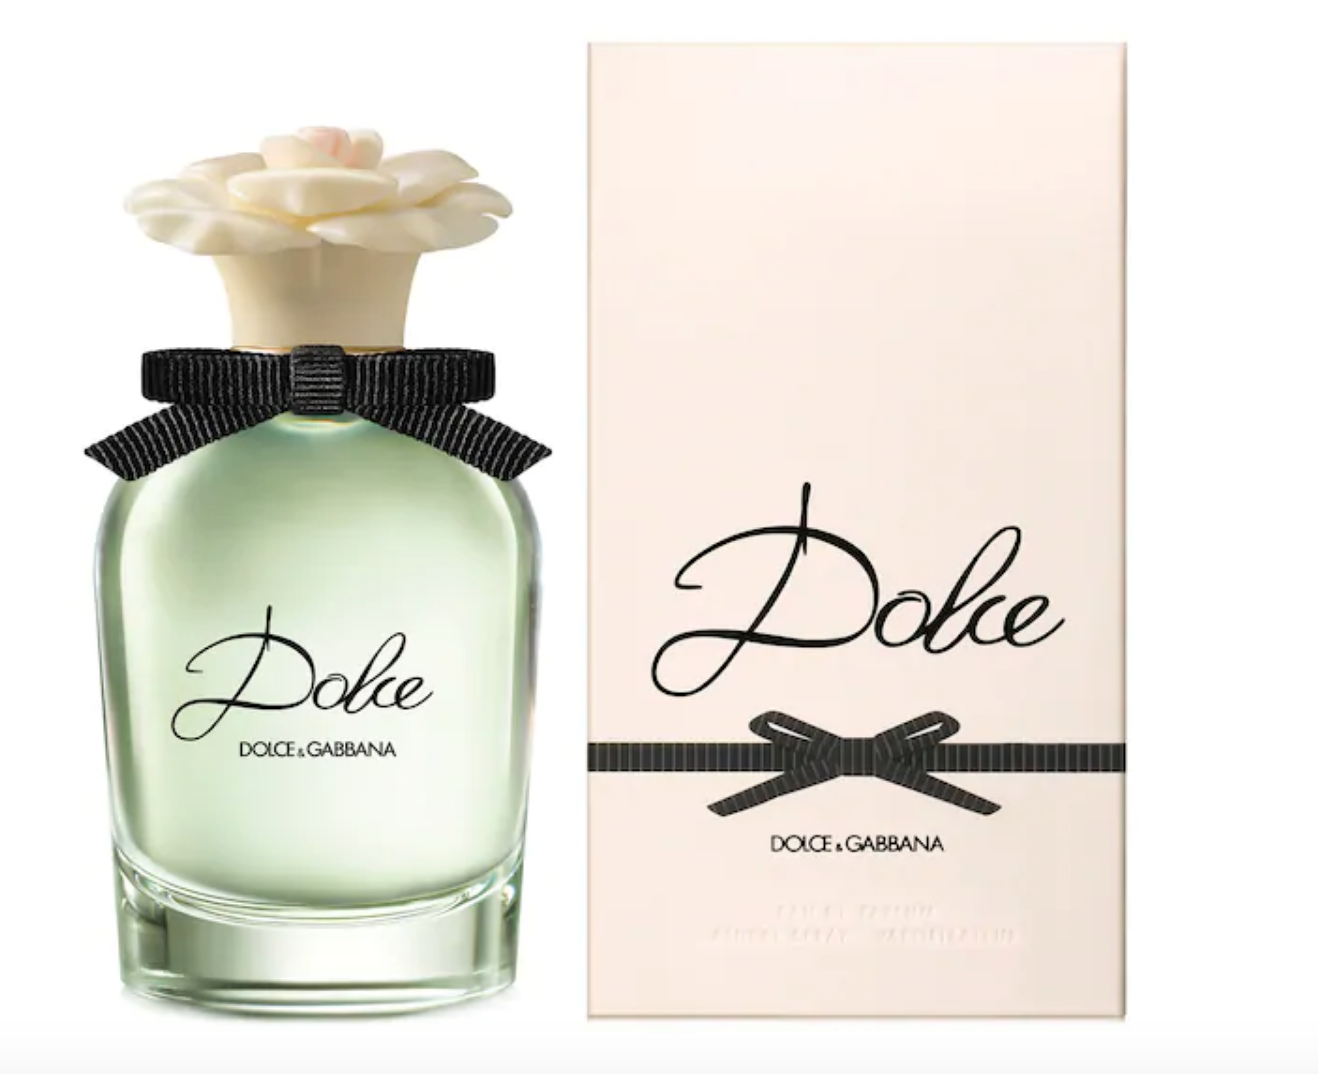 Dolce and Gabbana Dolce fragrance perfume millennial mom gift ideas